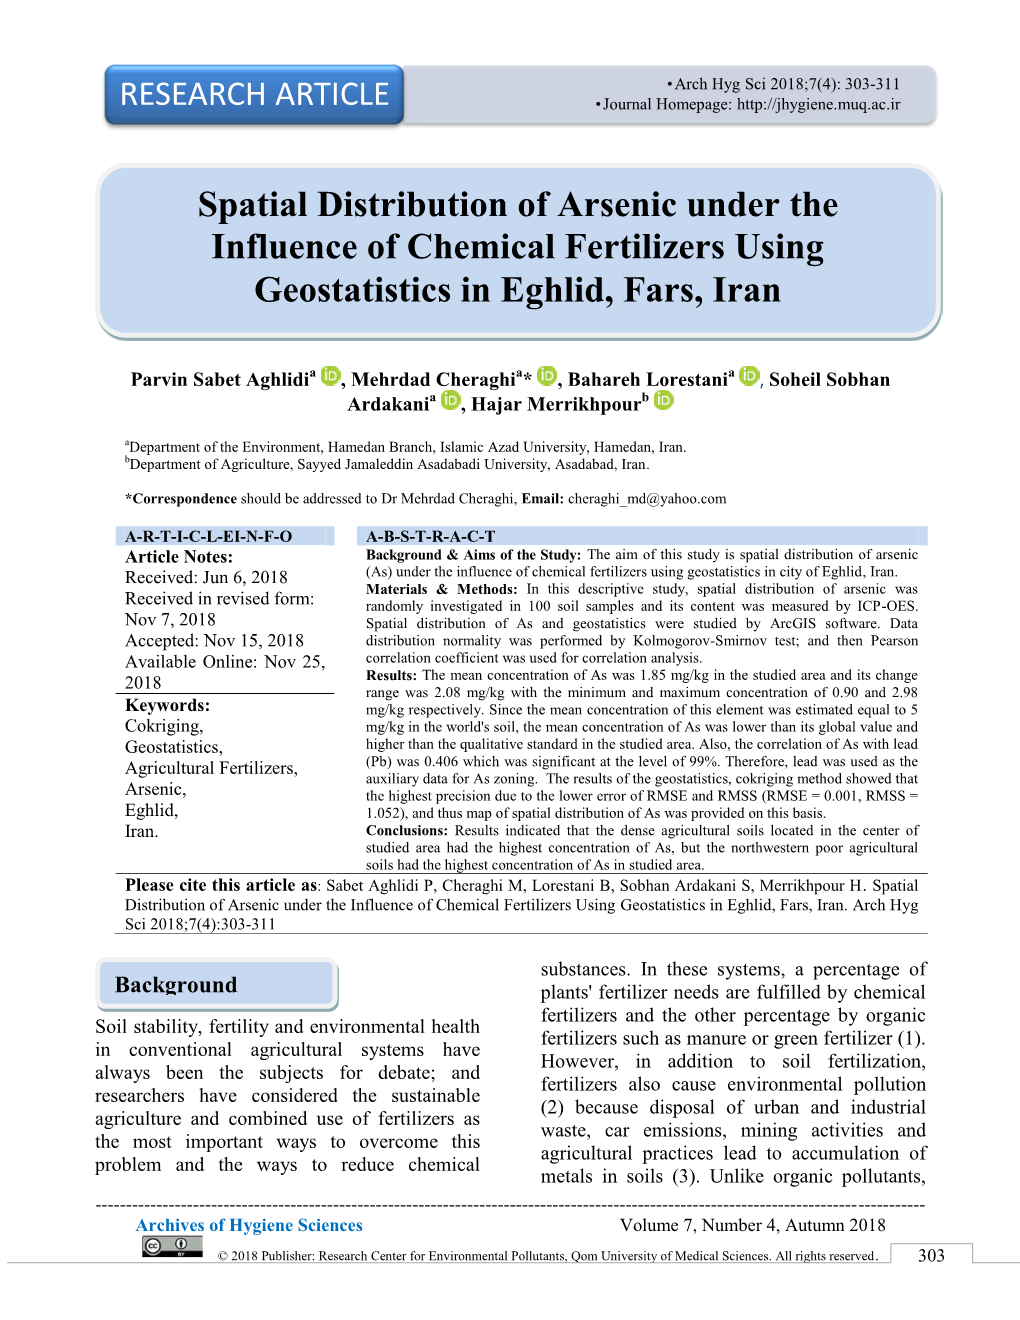 Spatial Distribution of Arsenic Under the Influence of Chemical Fertilizers Using Geostatistics in Eghlid, Fars, Iran